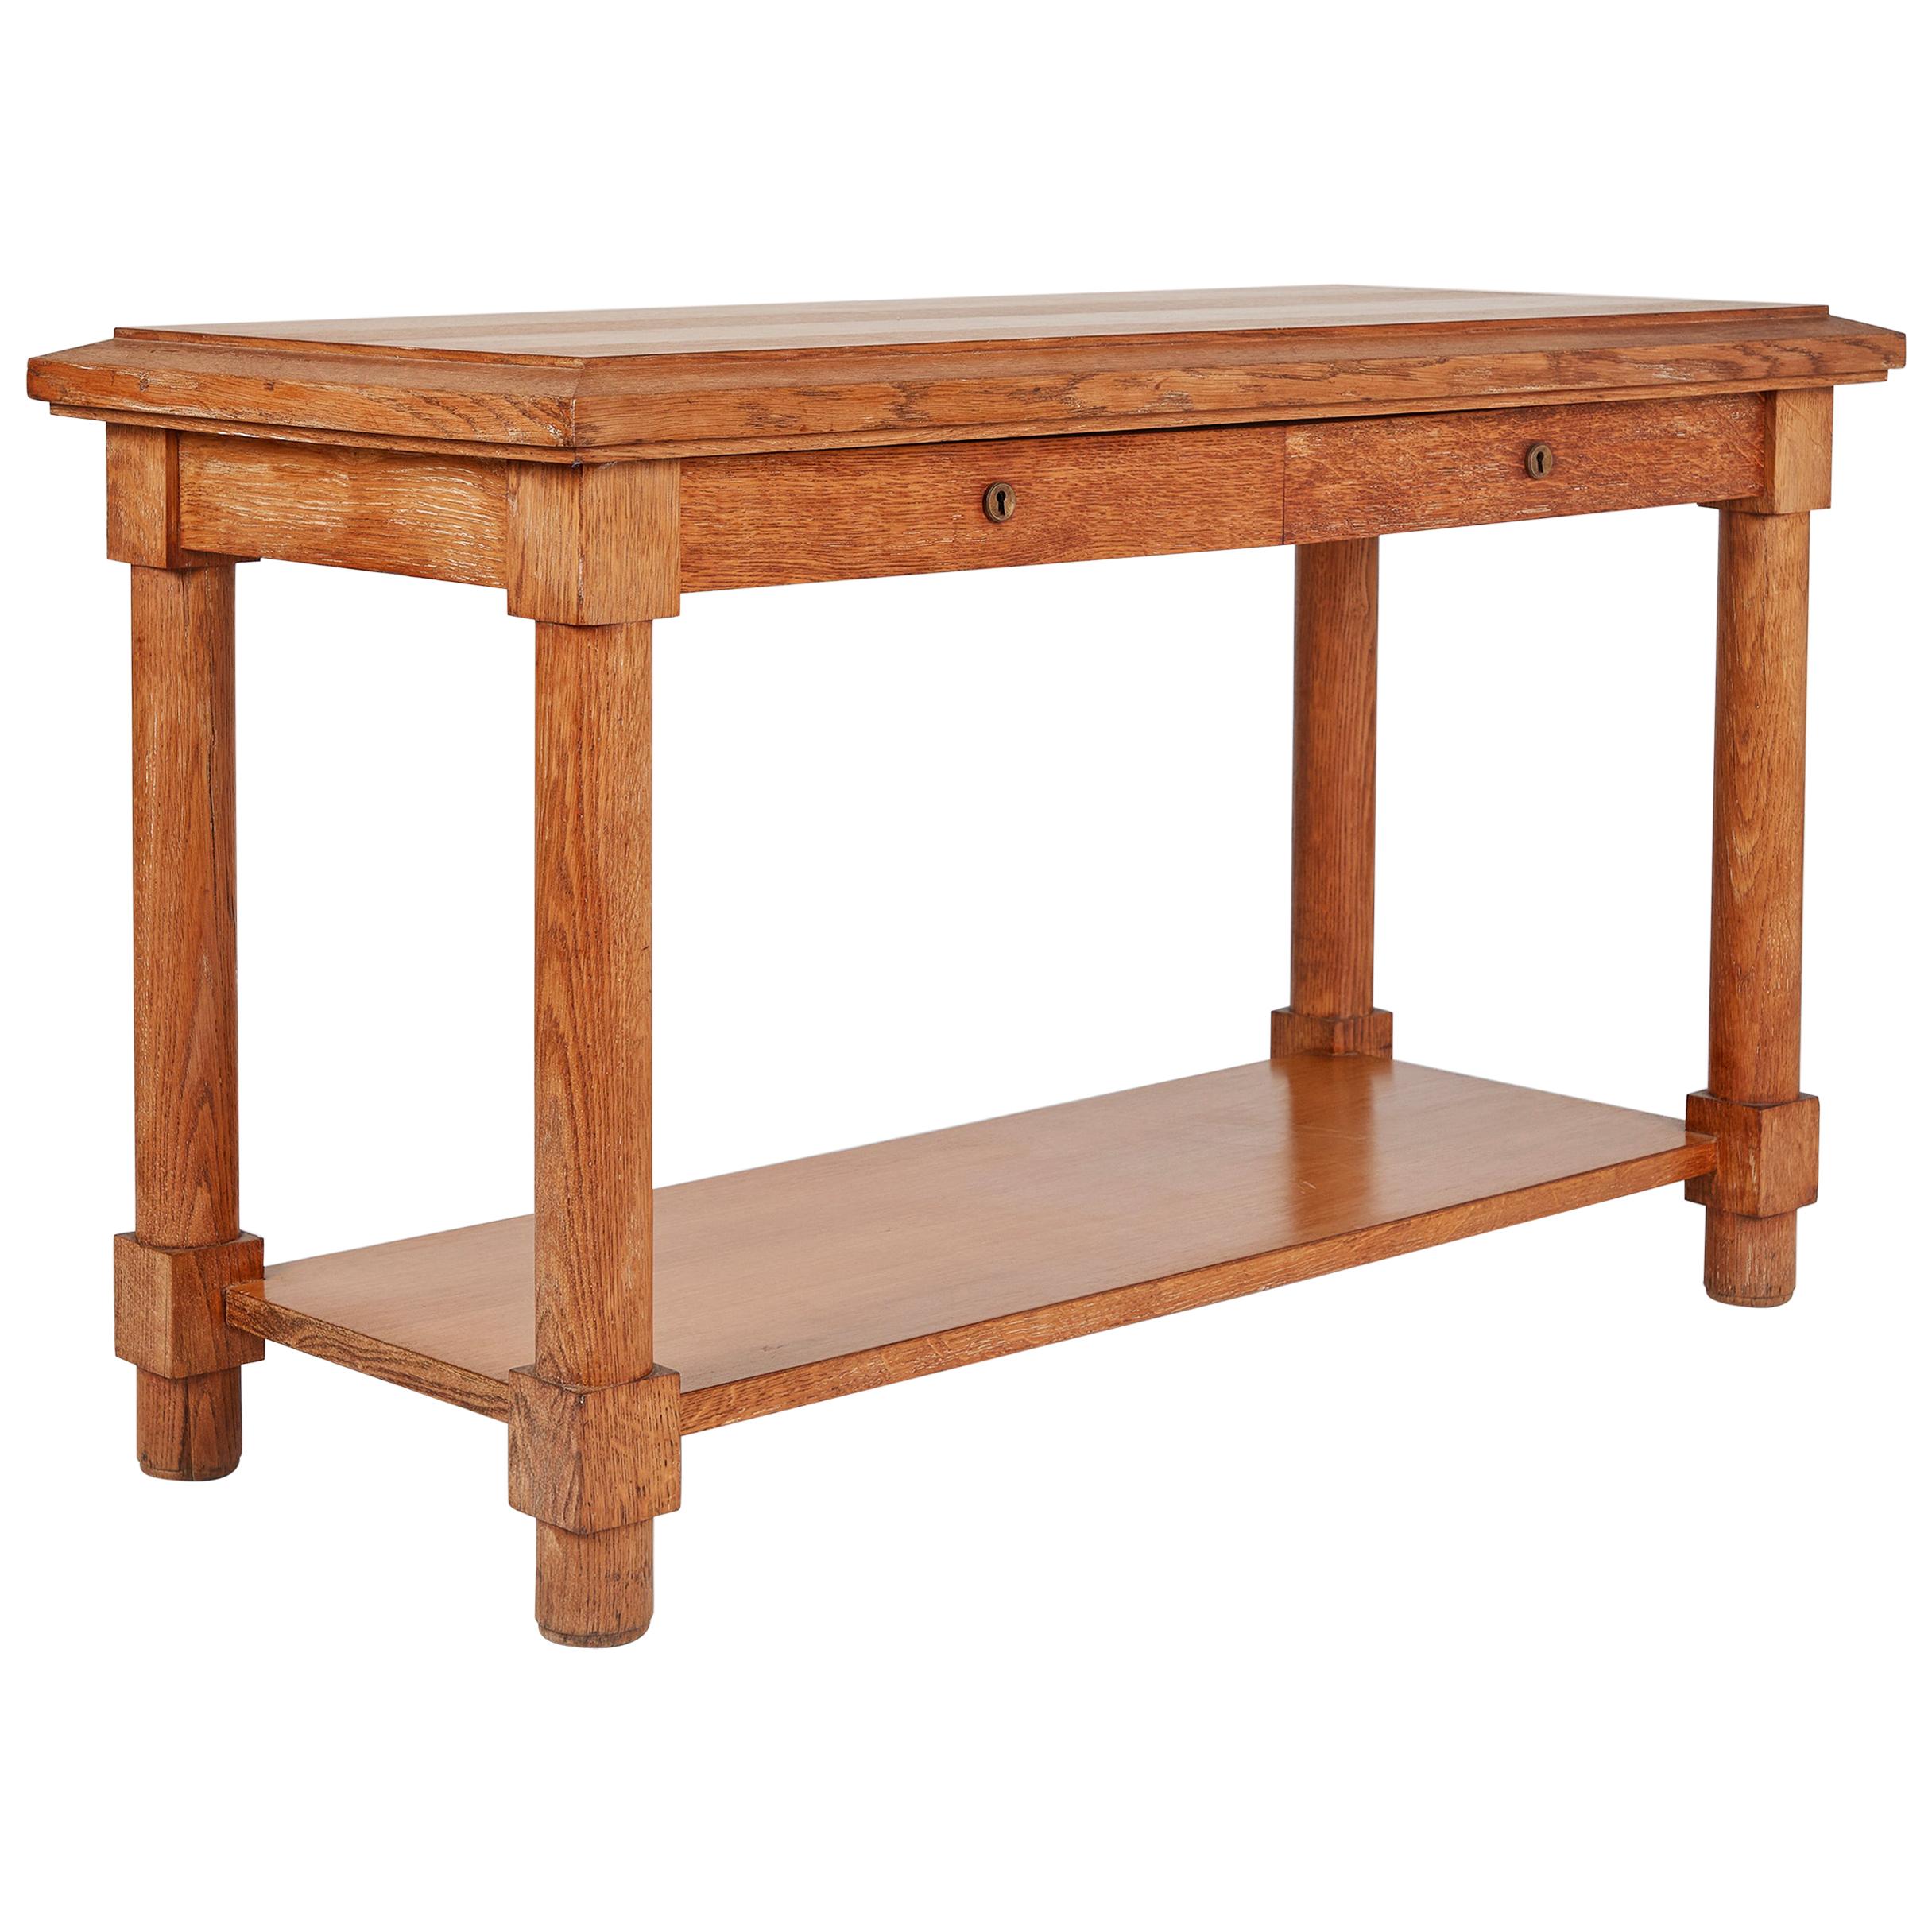 Jacques Adnet, Neoclassically Inspired Oak Console Table, France, Midcentury